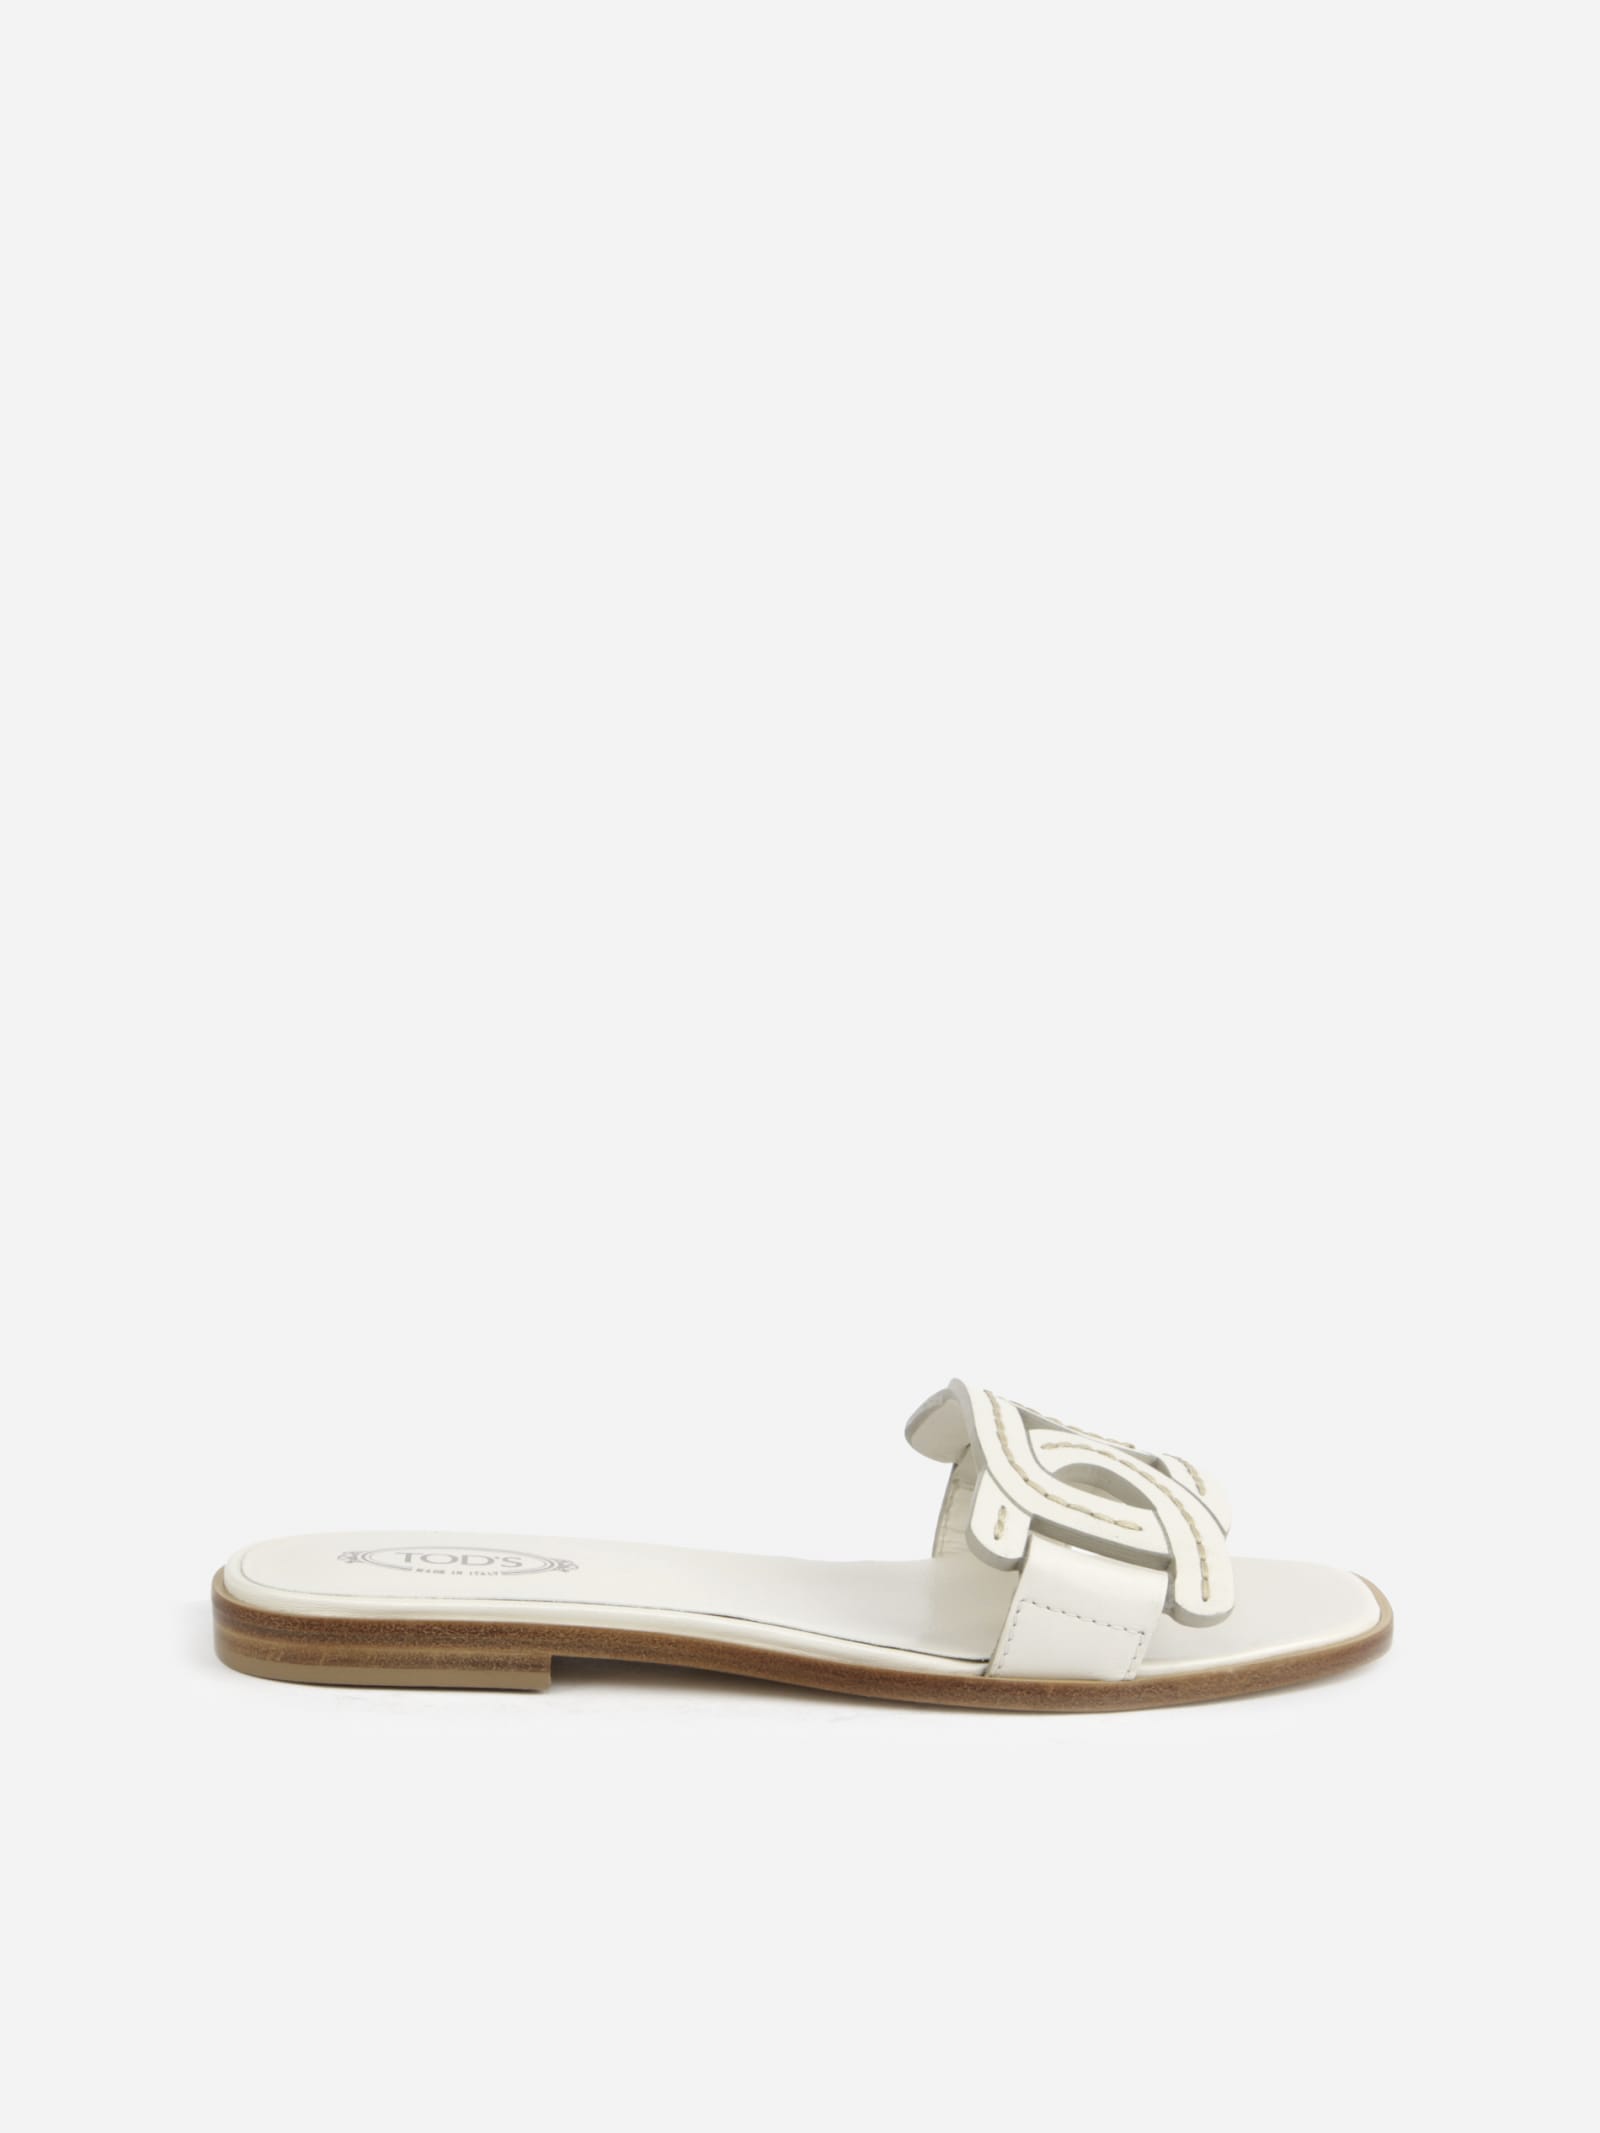 Buy Tods Braided Leather Sandals online, shop Tods shoes with free shipping